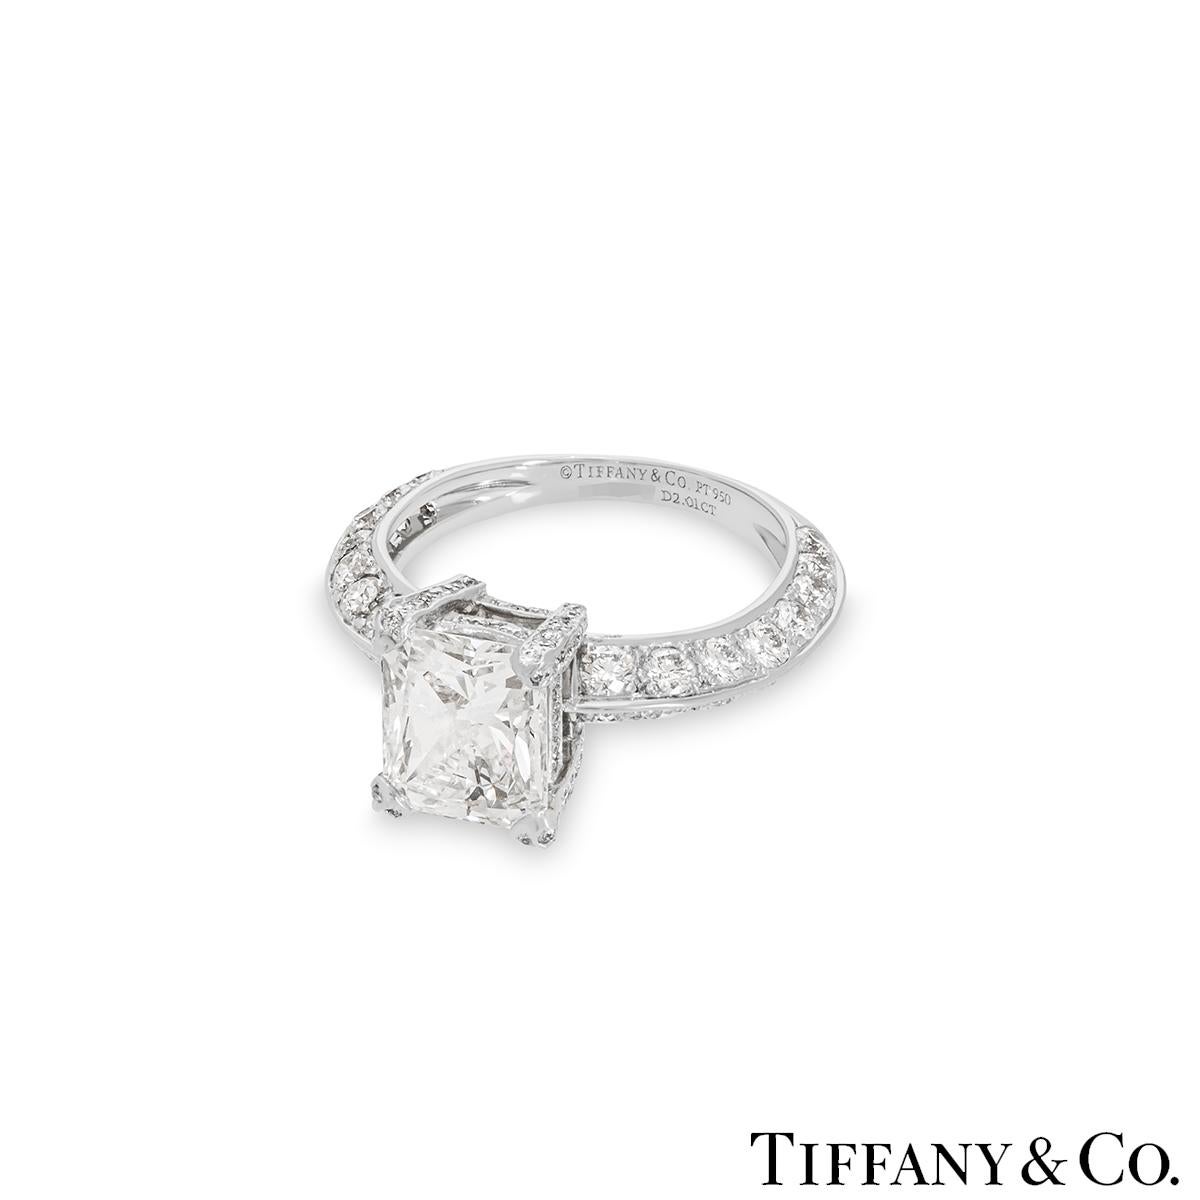 GIA Certified Tiffany & Co. Platinum Radiant Cut Diamond Ring 2.01 Carat G/IF For Sale 1